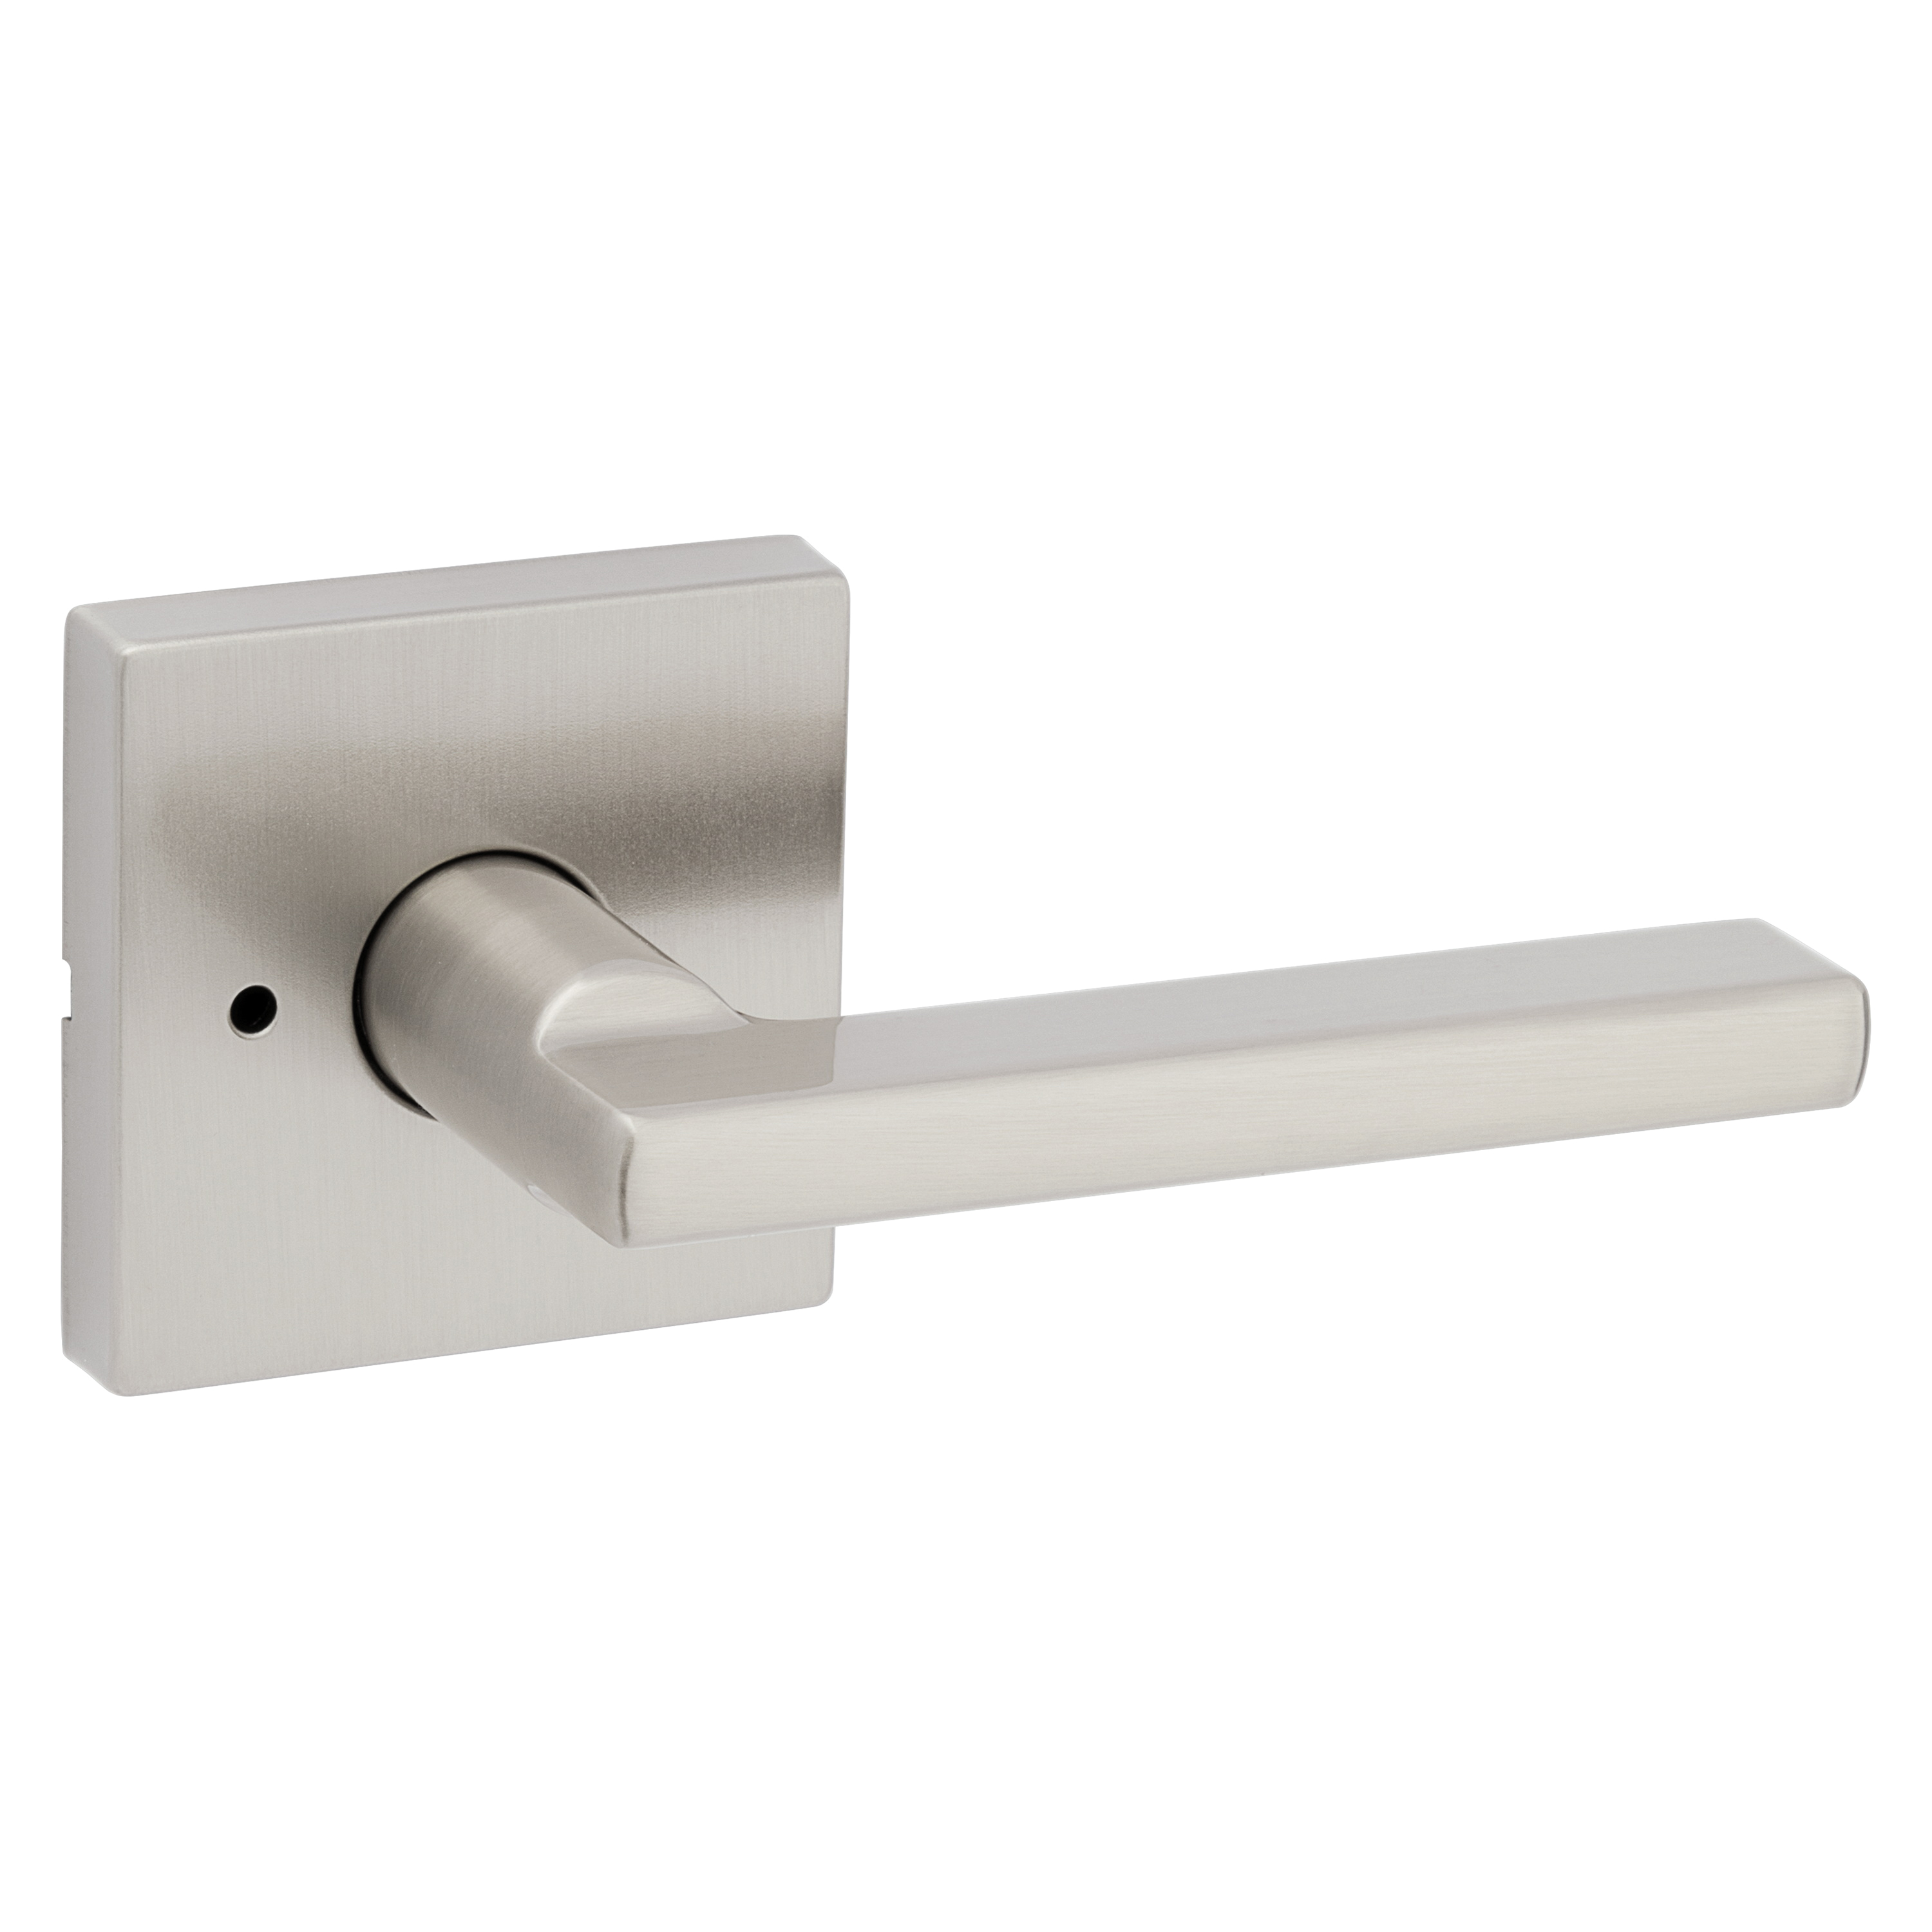 Signature Series 155HFL SQT 15 Privacy Lever, Pushbutton Lock, Satin Nickel, Zinc, Residential, Reversible Hand